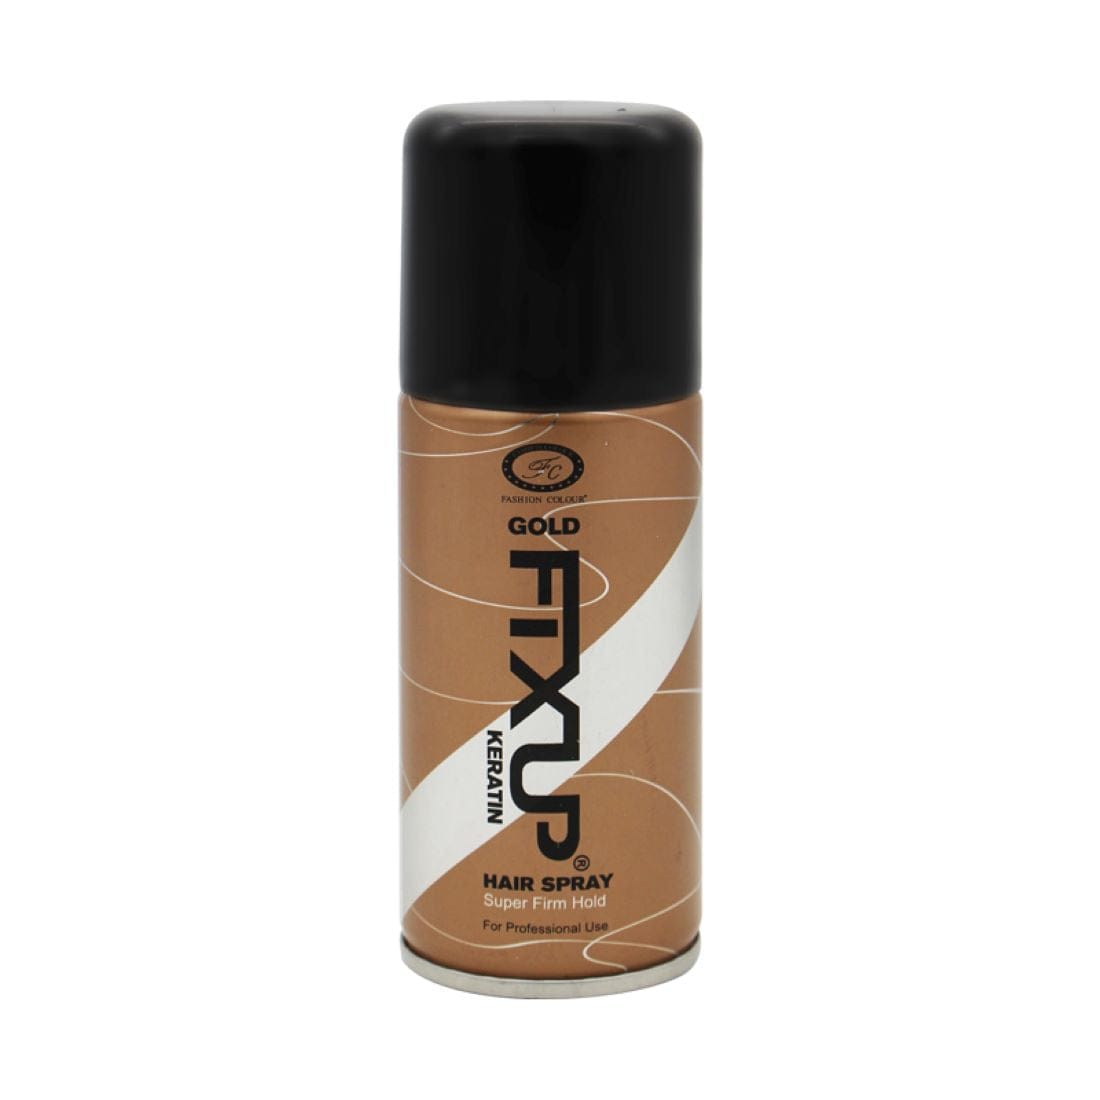 Buy Golden Hair Color Spray For Women Online at Low Prices in India   Amazonin